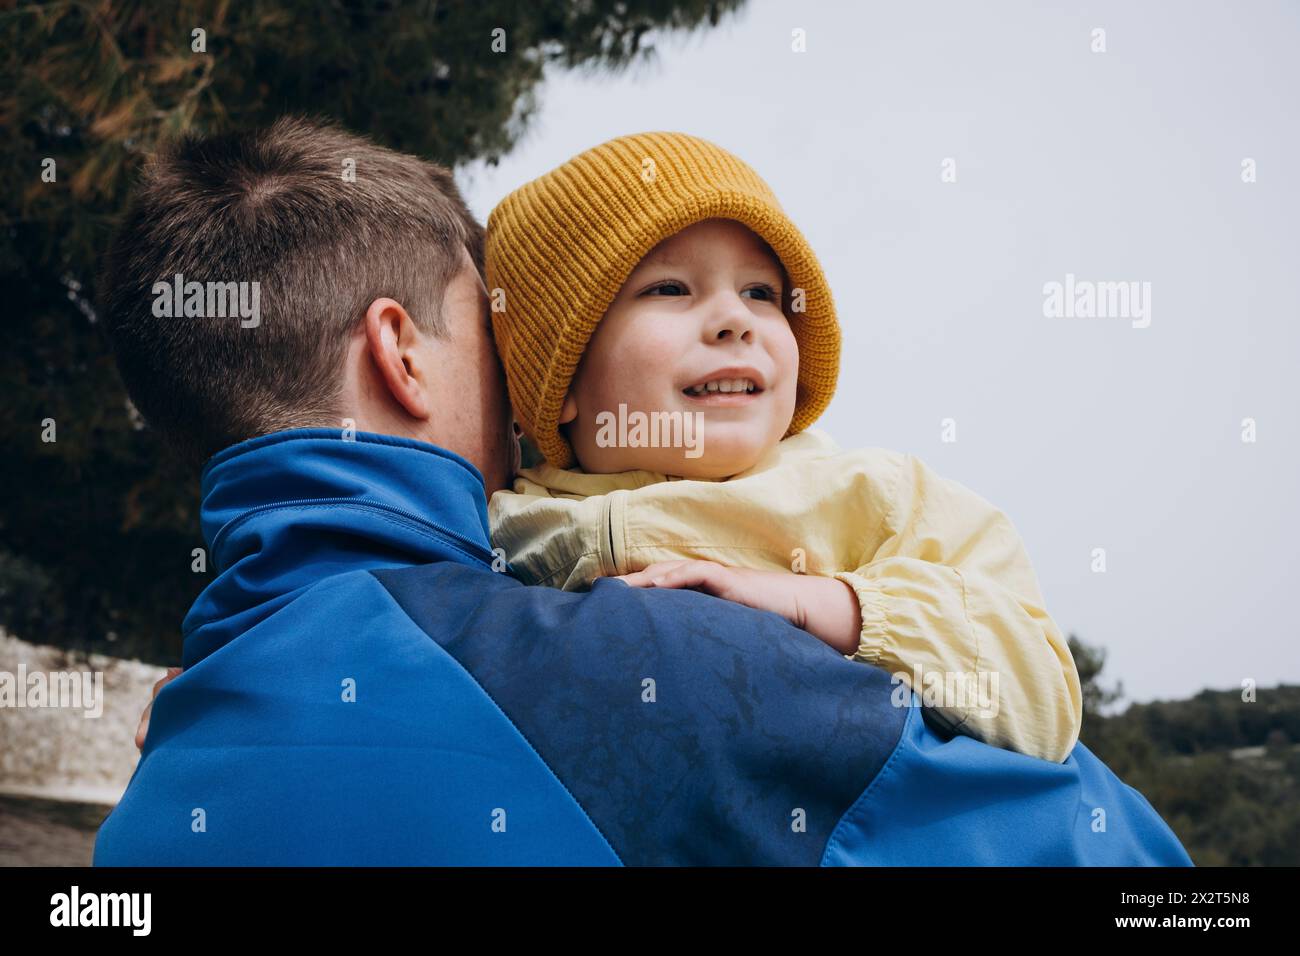 Father carrying son wearing knit hat Stock Photo